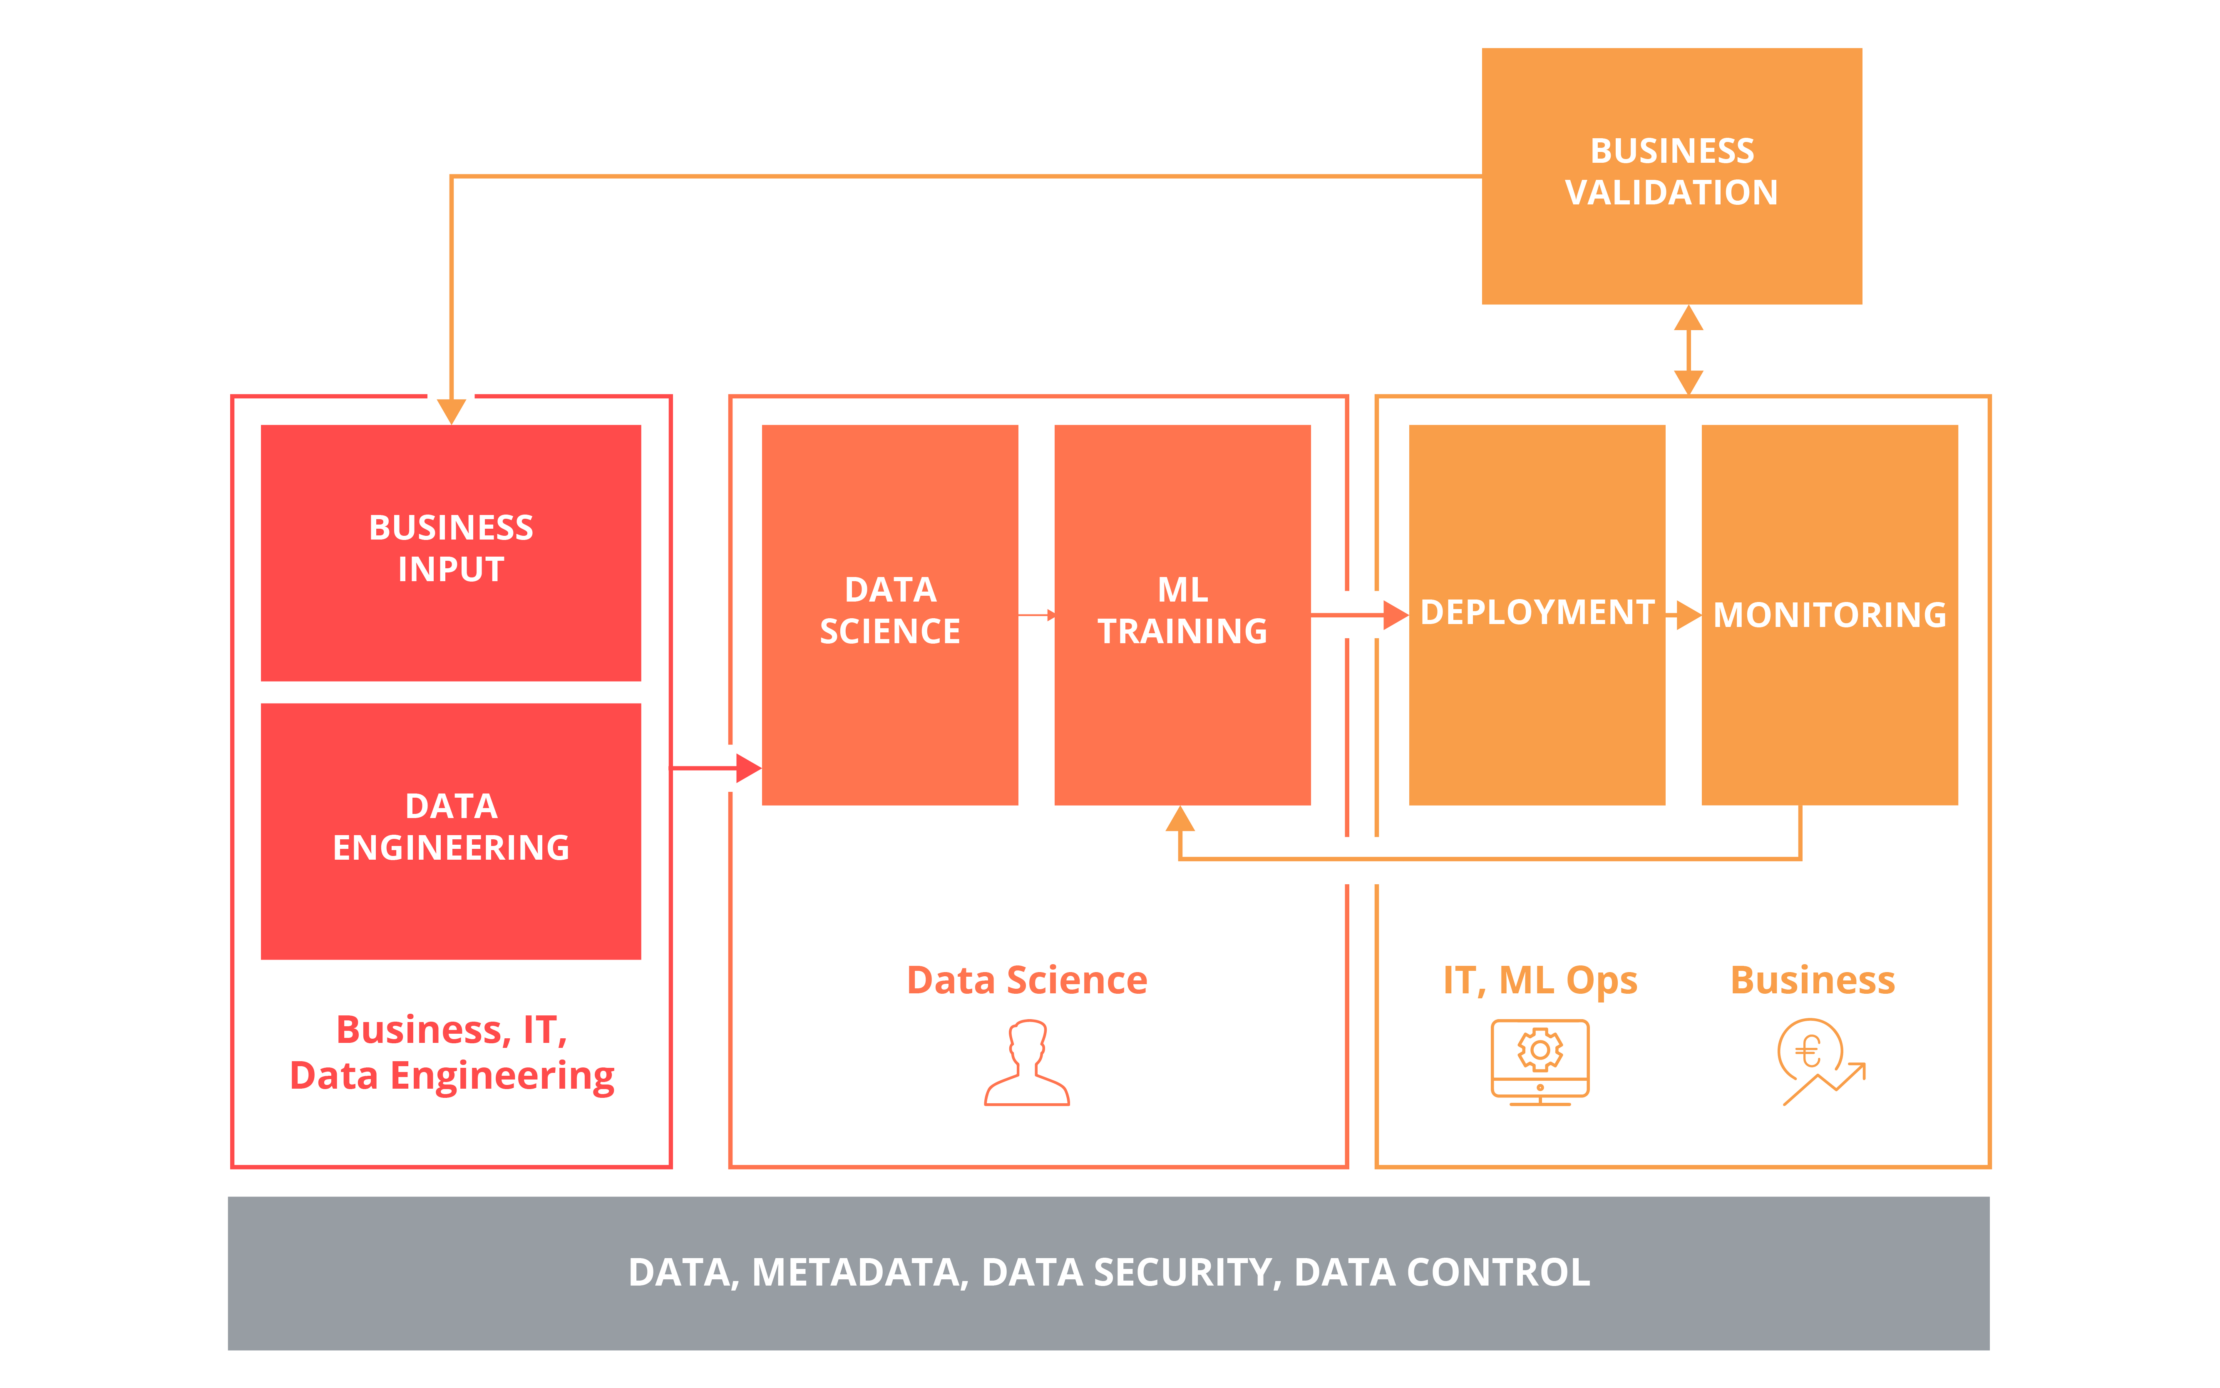 This data science diagram shows a machine learning model in enterprise production environments.